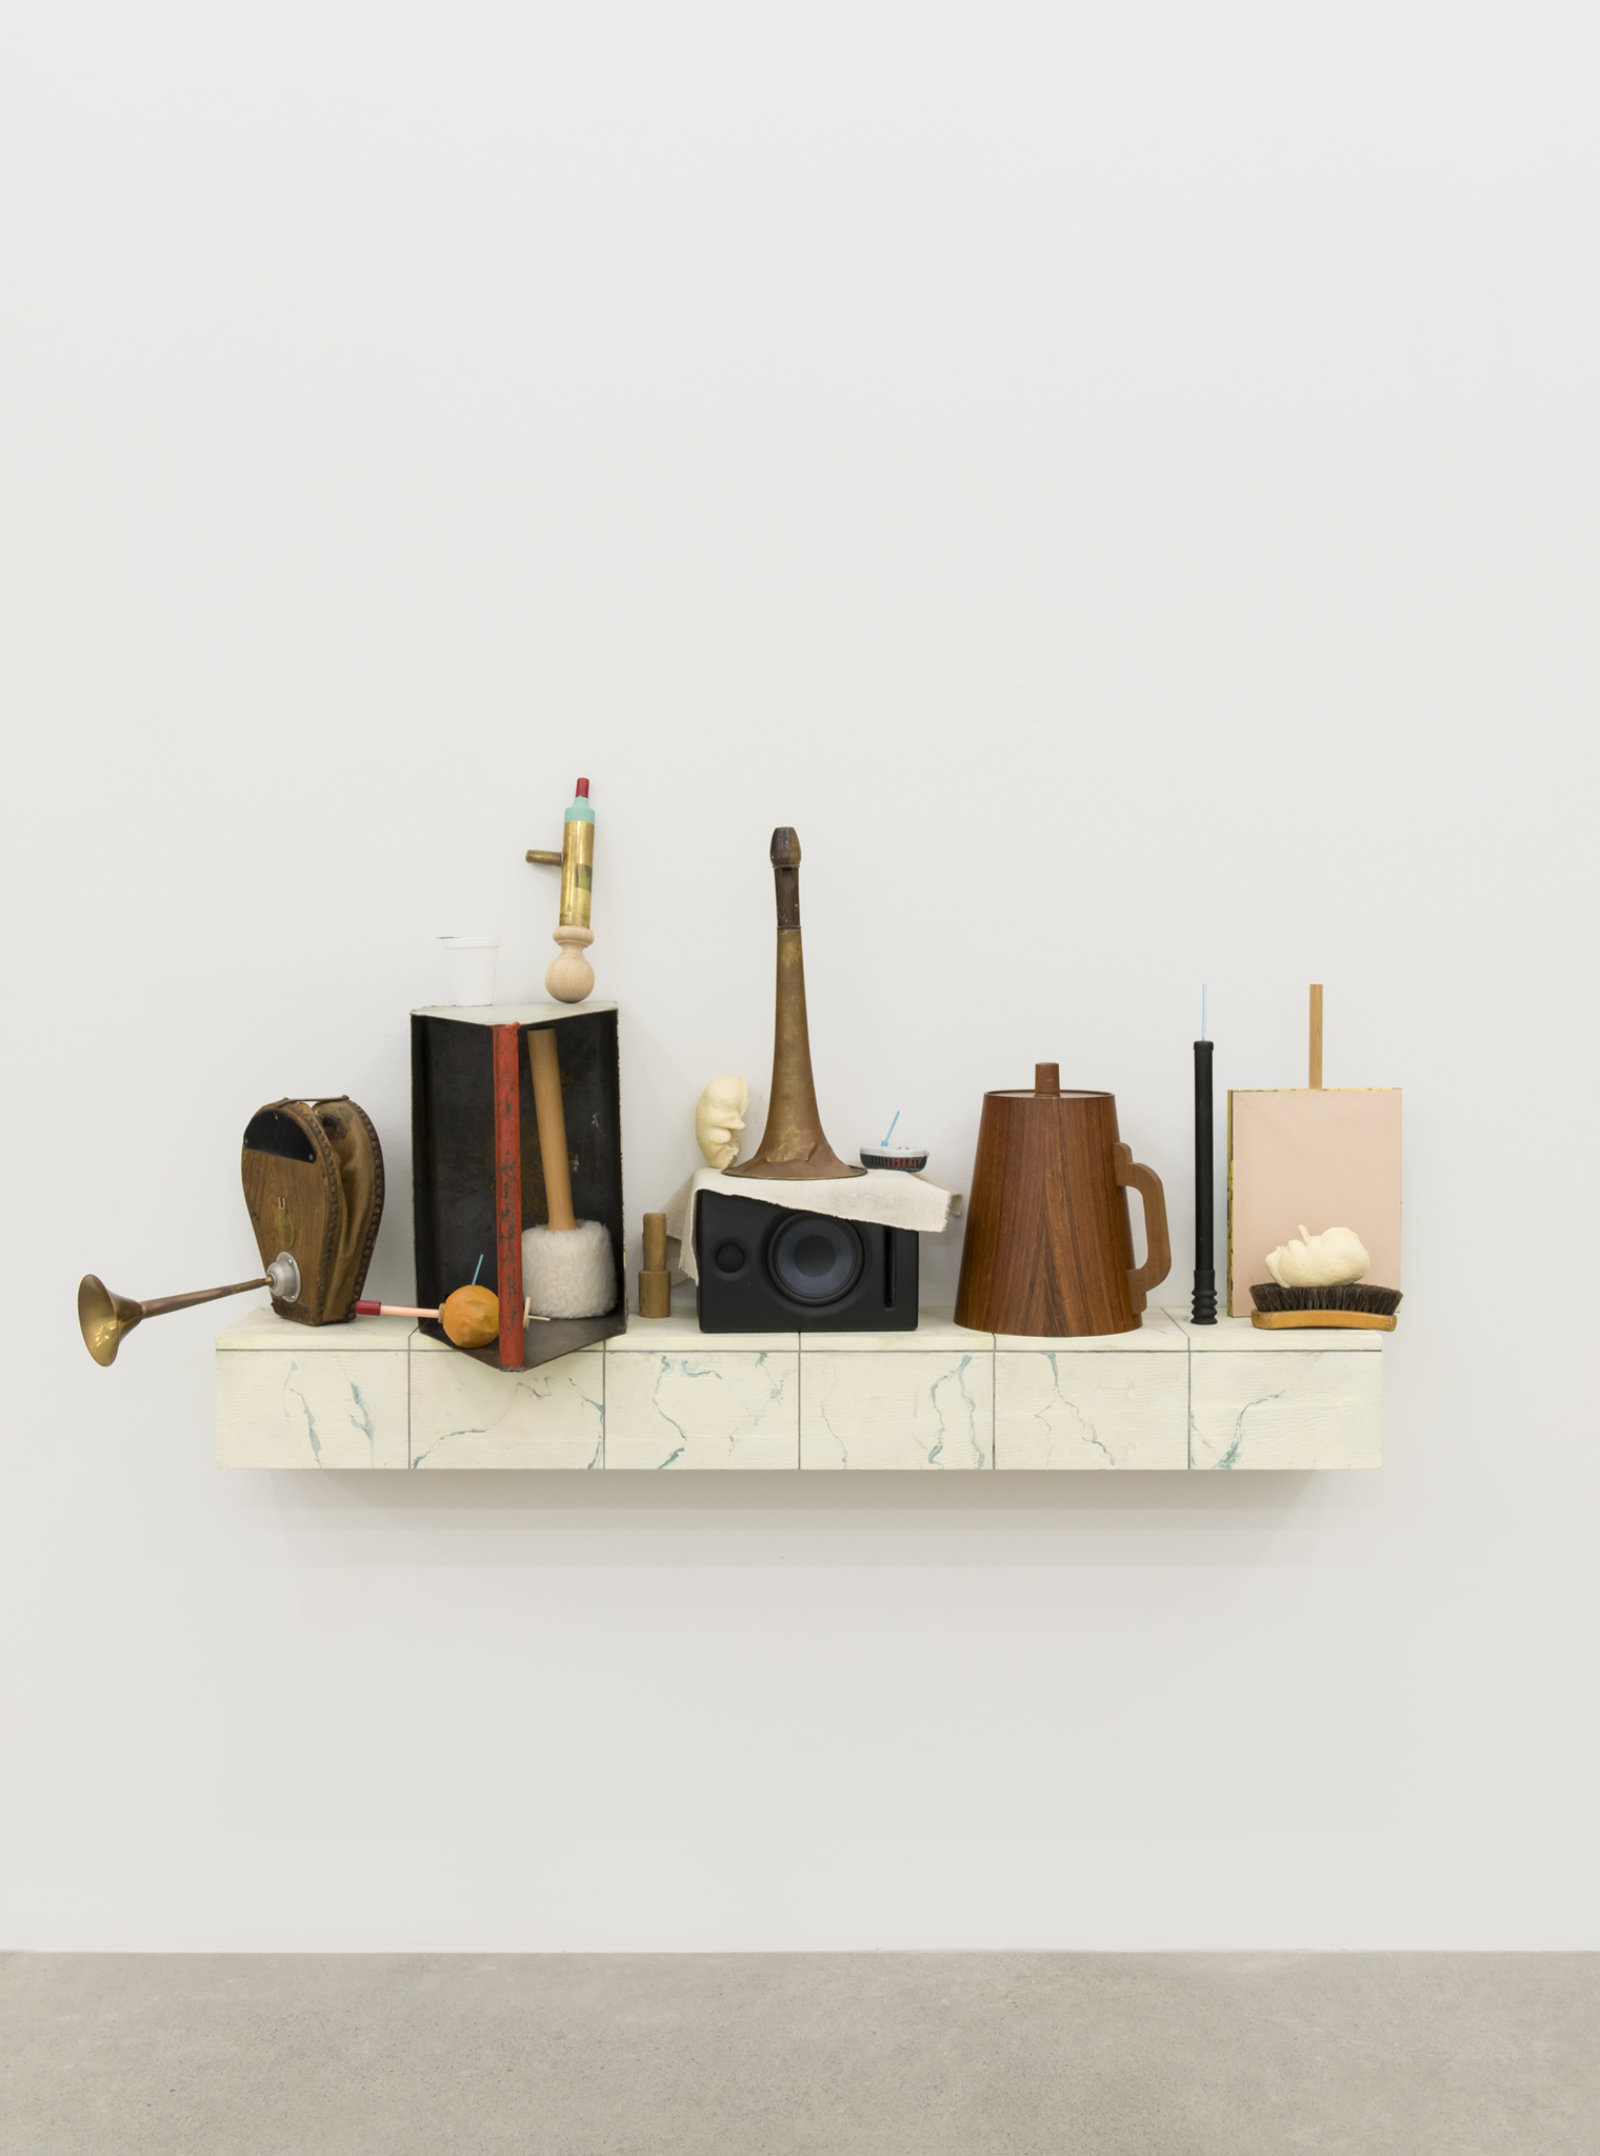 Ashes Withyman, Furnas, Compass, Altar, Musca, River, Cetus, Cup, 2017–2018, tool box, styrofoam cup, mallet, brass horn, bullae, mosquito repelling devices, shoe brush, paper, wood, brass, animal call parts, musical instrument parts, pump, speaker, painted plywood, 34 x 63 x 14 in. (86 x 160 x 34 cm)